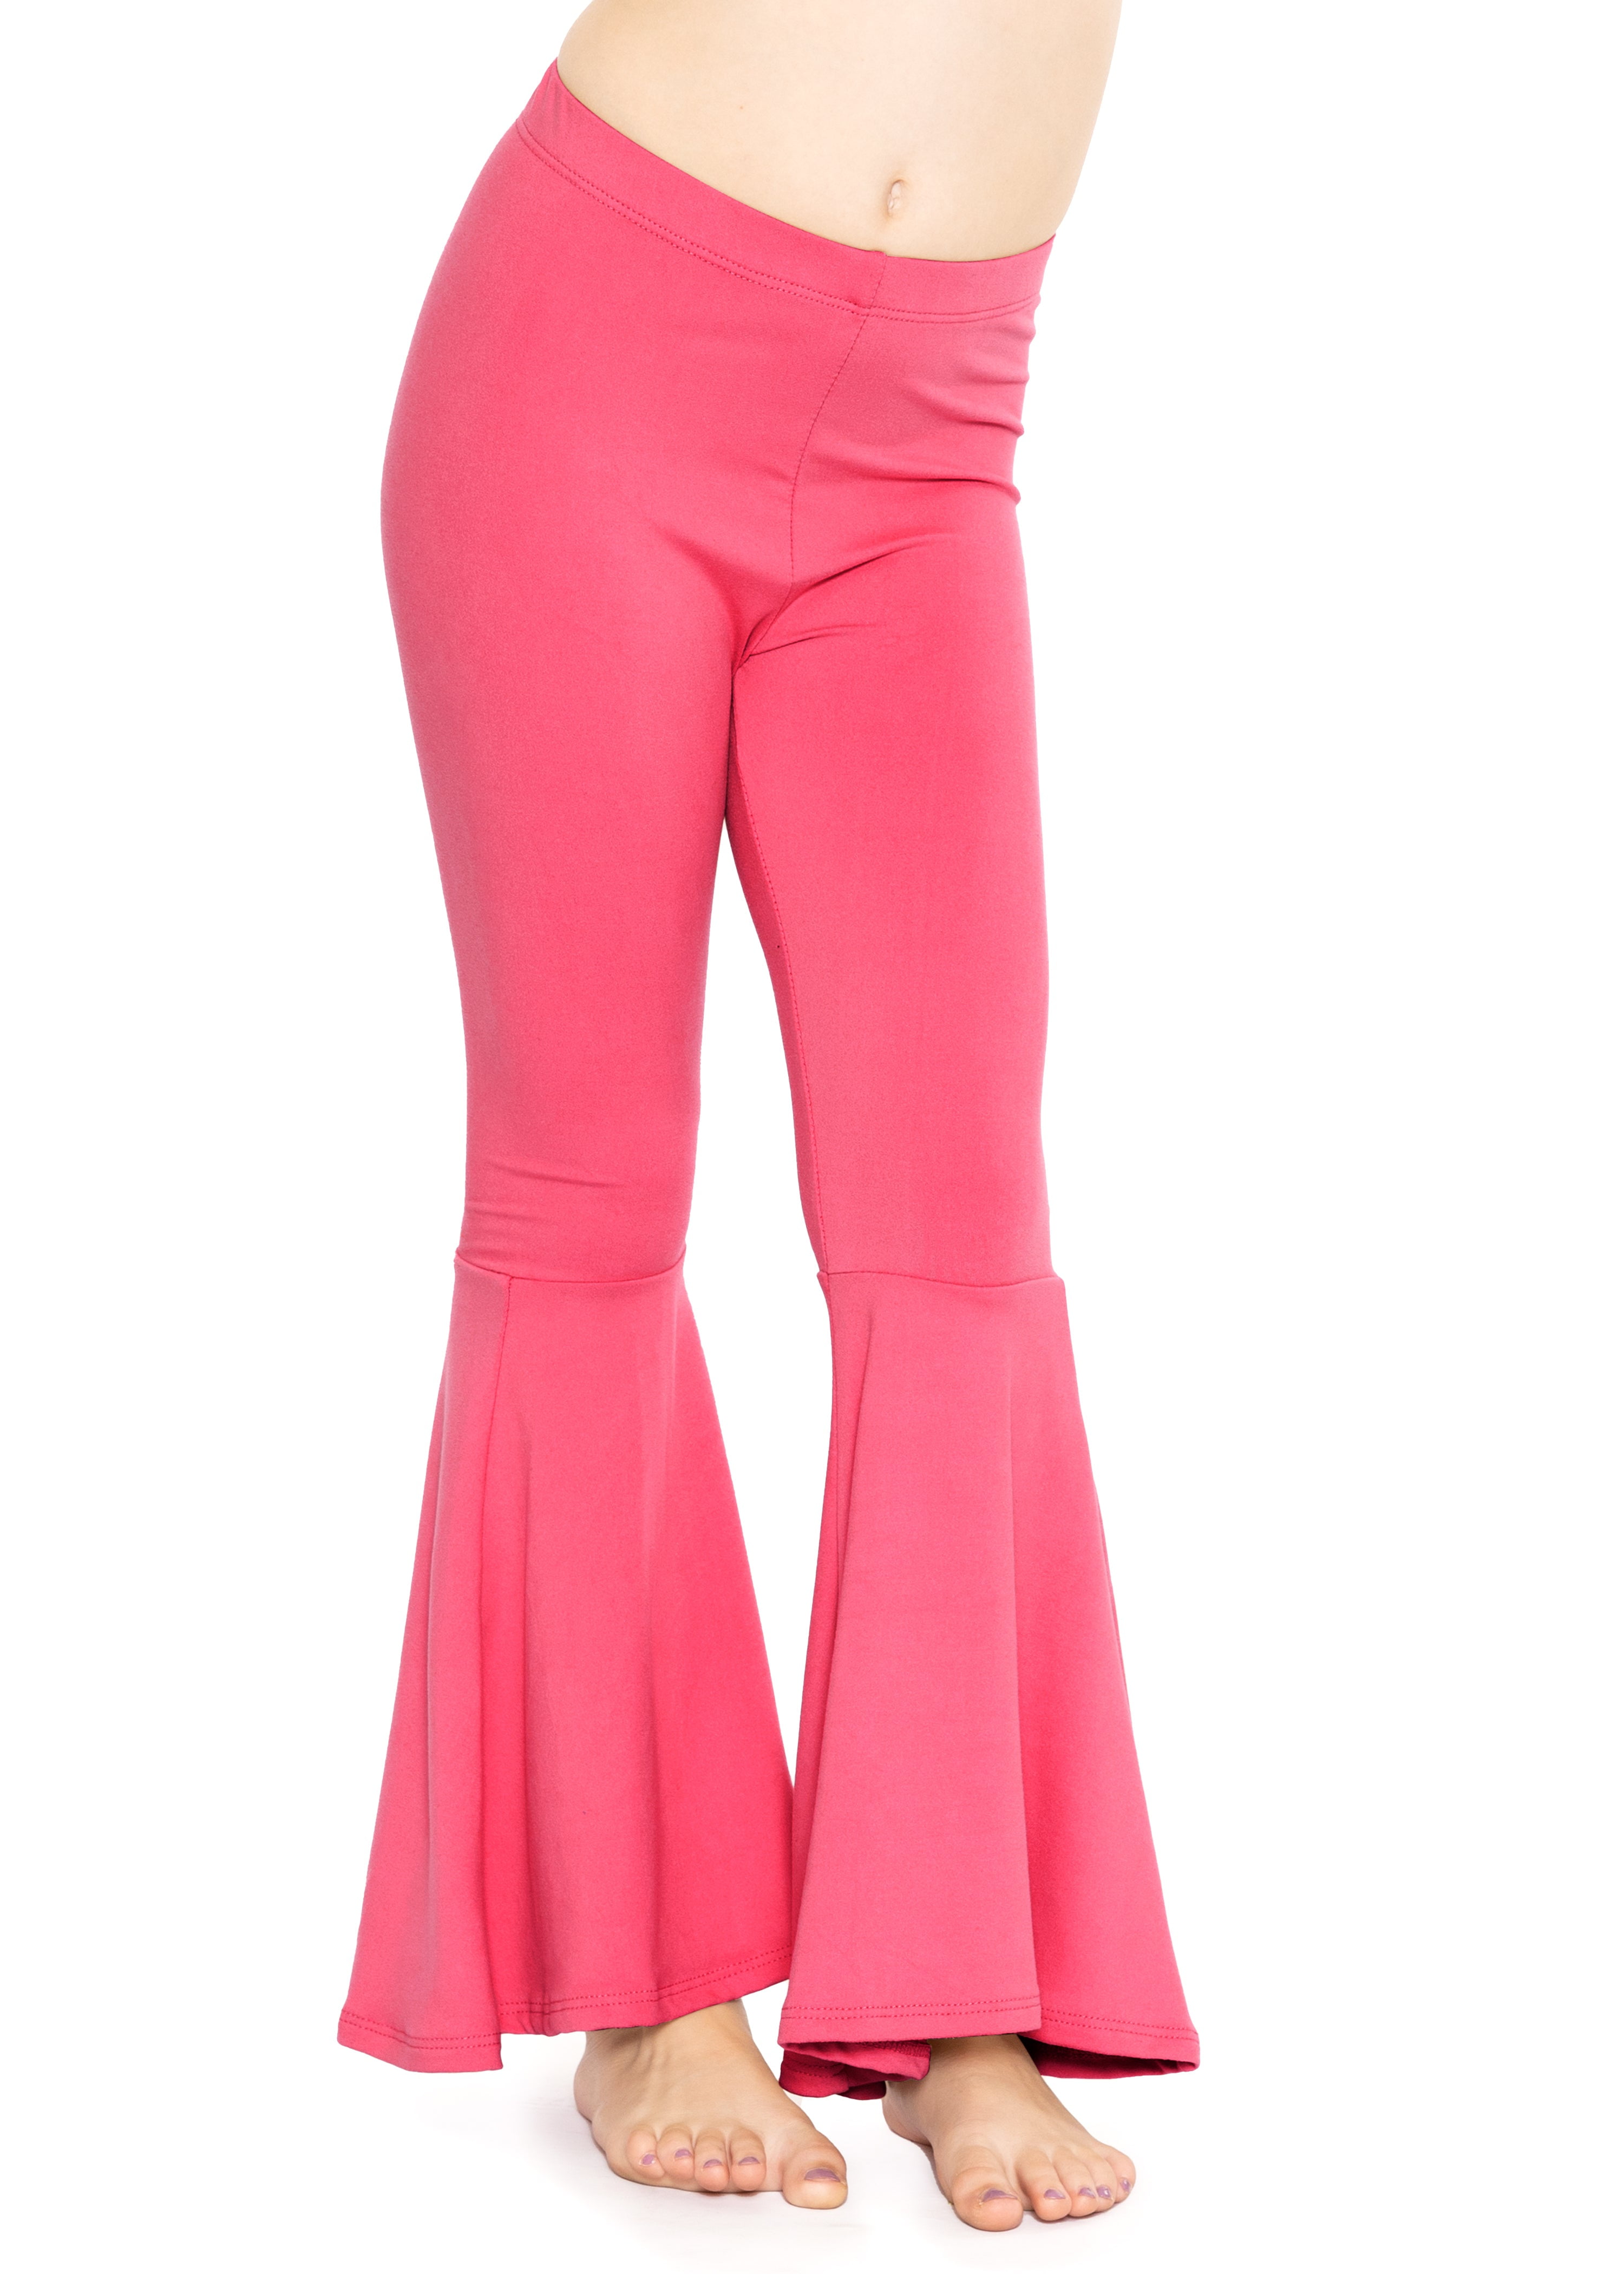 Stretch Is Comfort Girls Stretch Bellbottoms Flare Pants